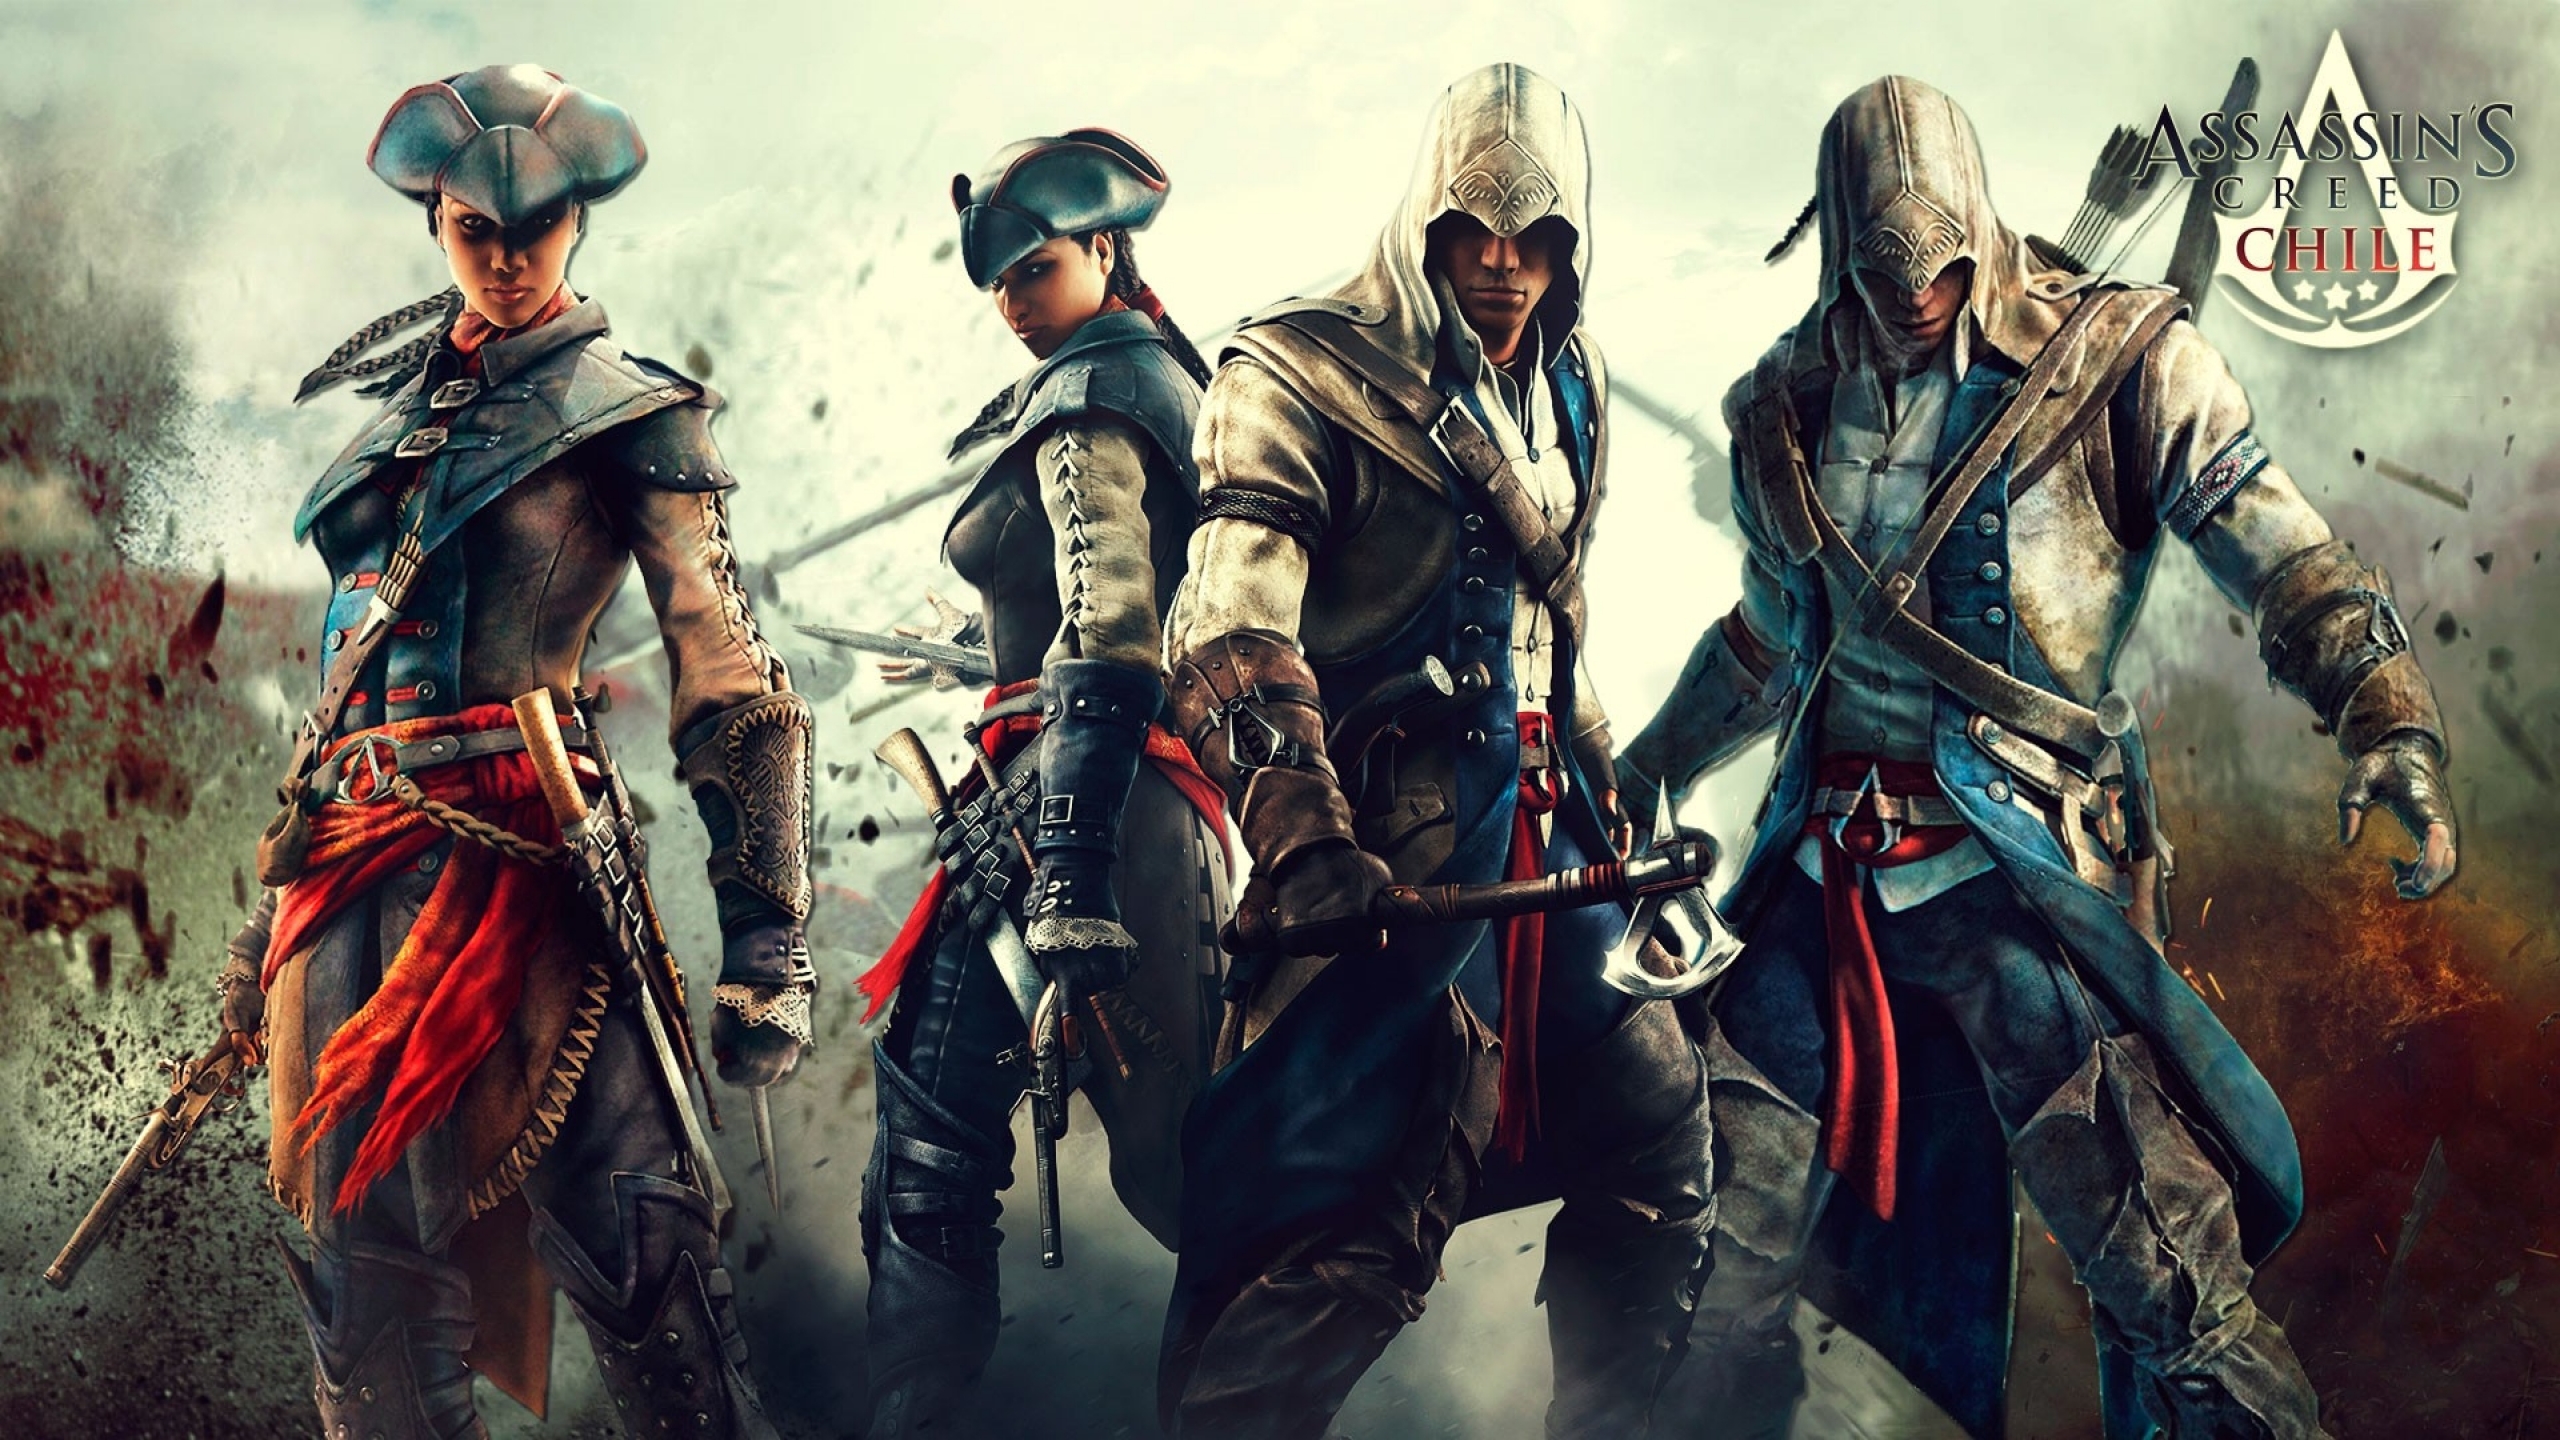 Video Game Assassin 039 S Creed Iii 2560x1440